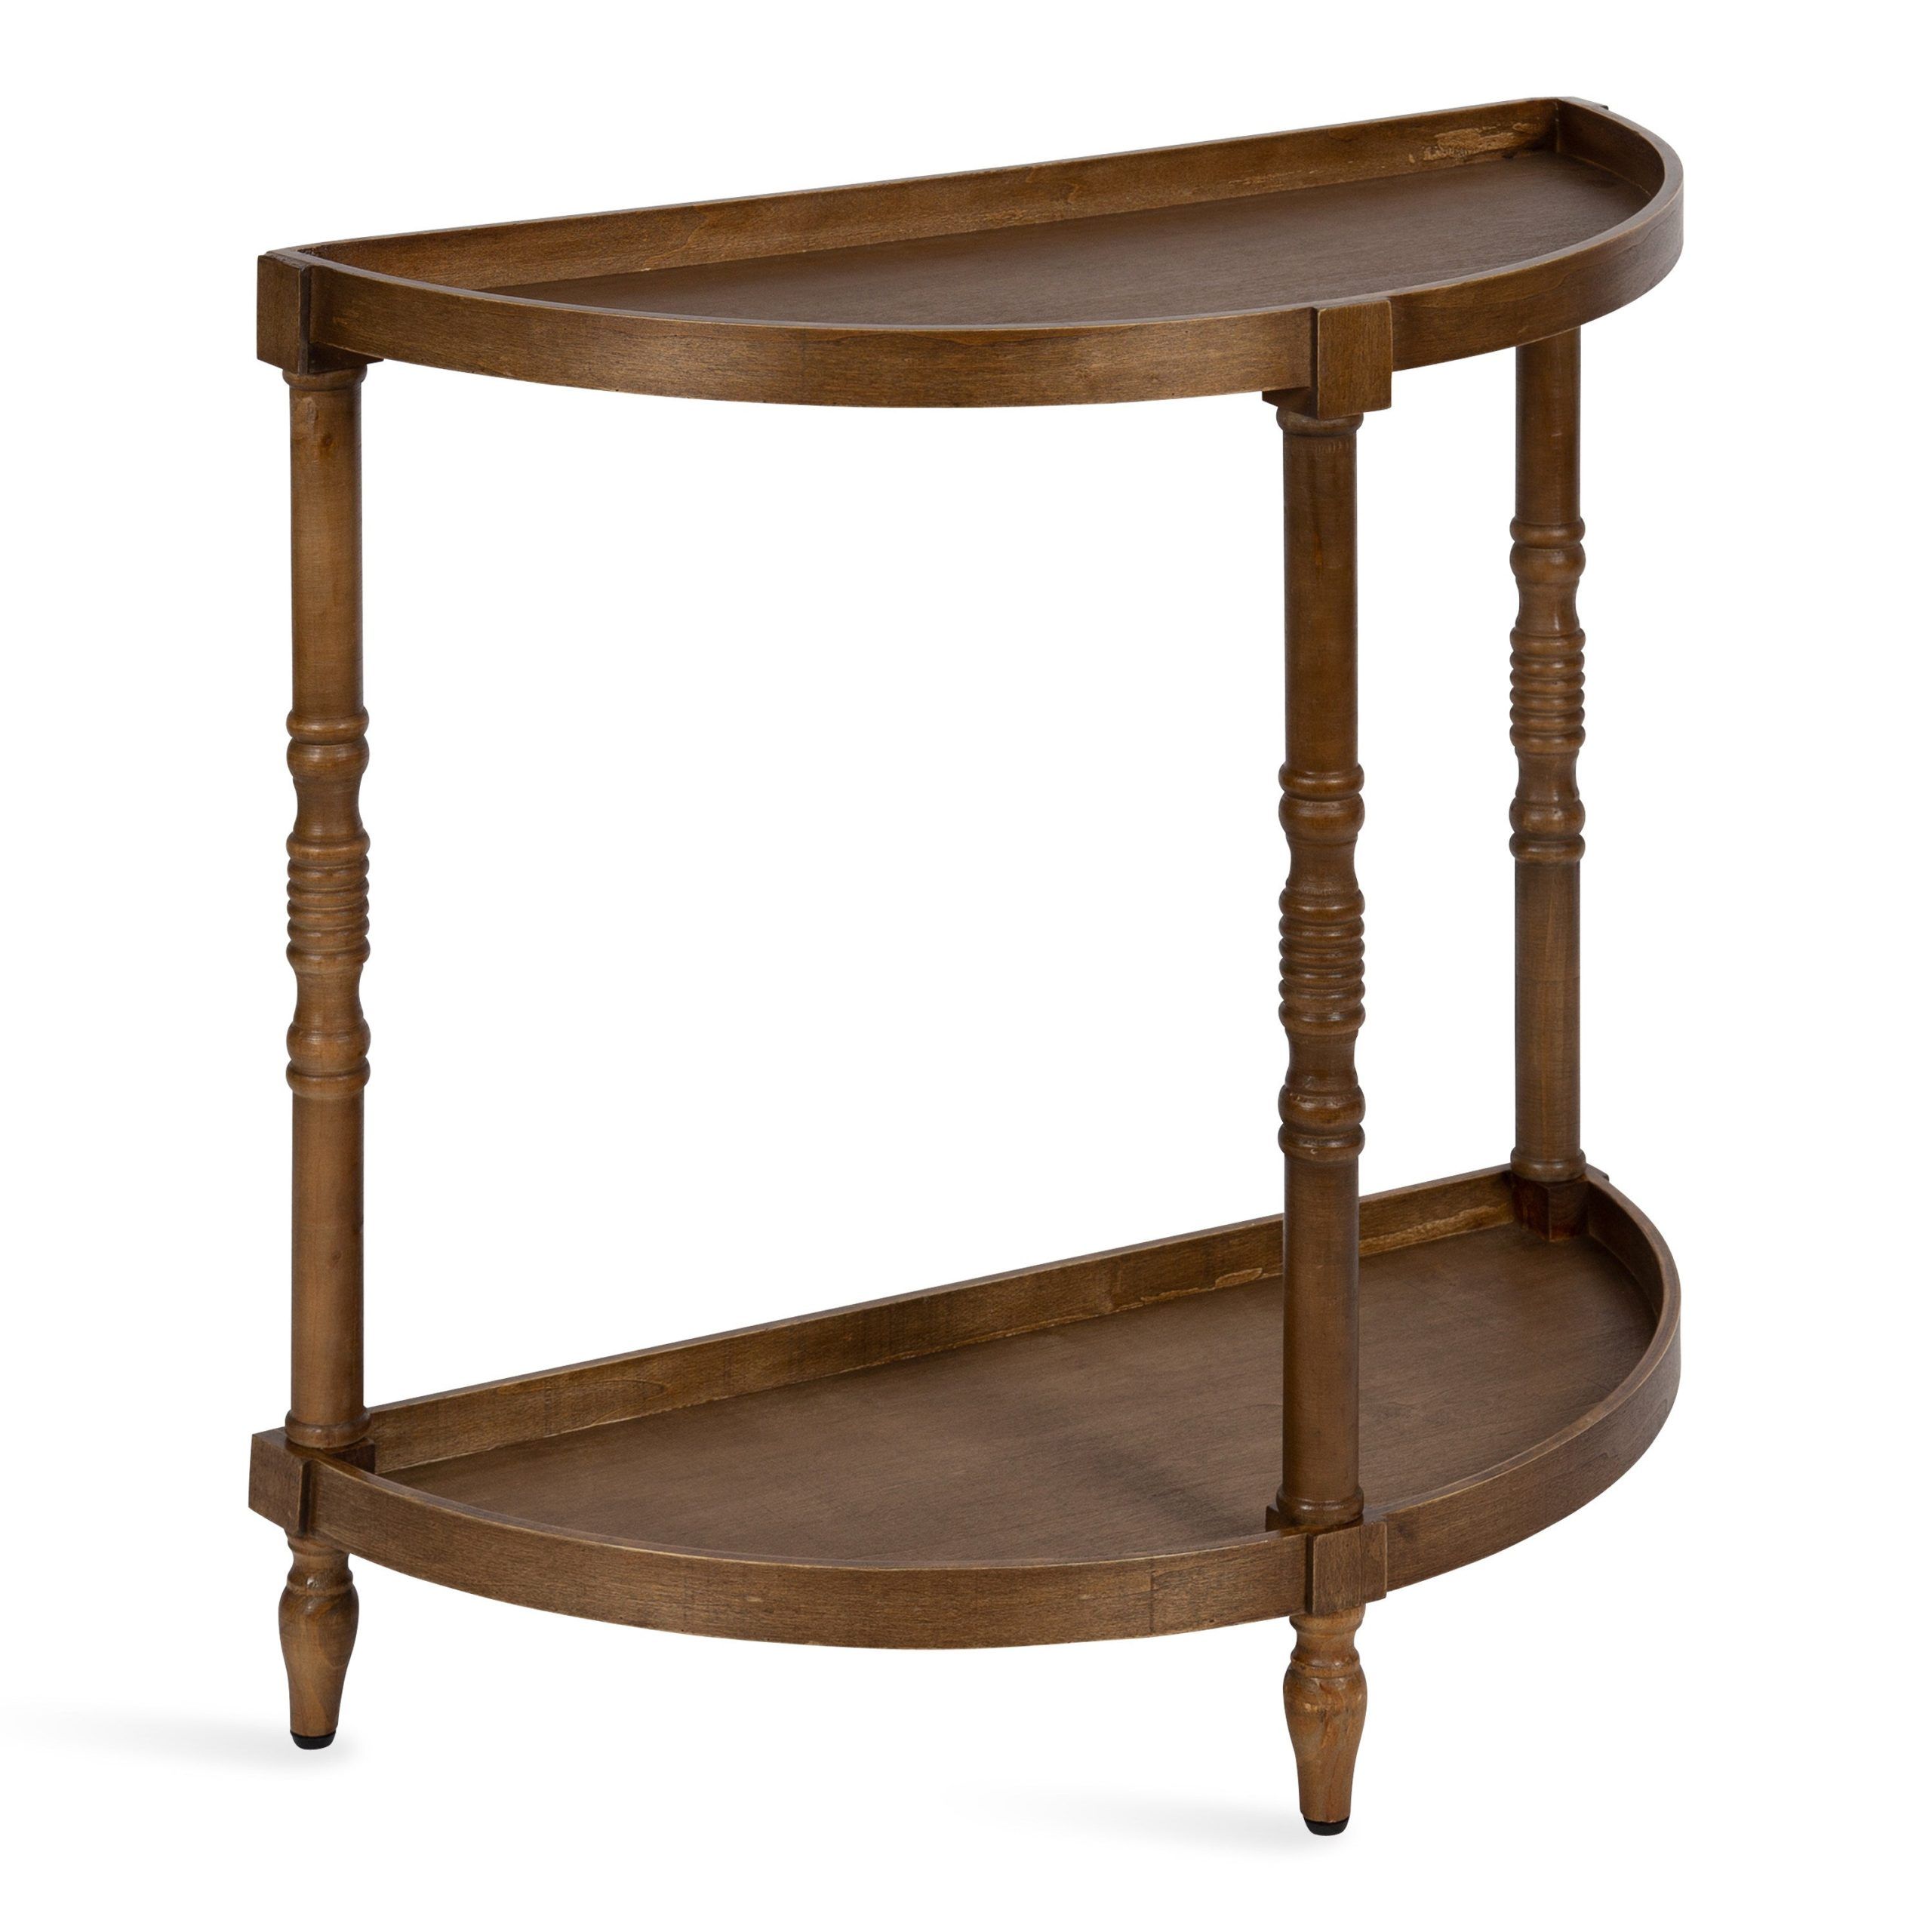 Kate And Laurel Bellport Farmhouse Demilune Console Table, 30 X 14 X 30 Regarding Kate And Laurel Bellport Farmhouse Drink Tables (Gallery 15 of 20)